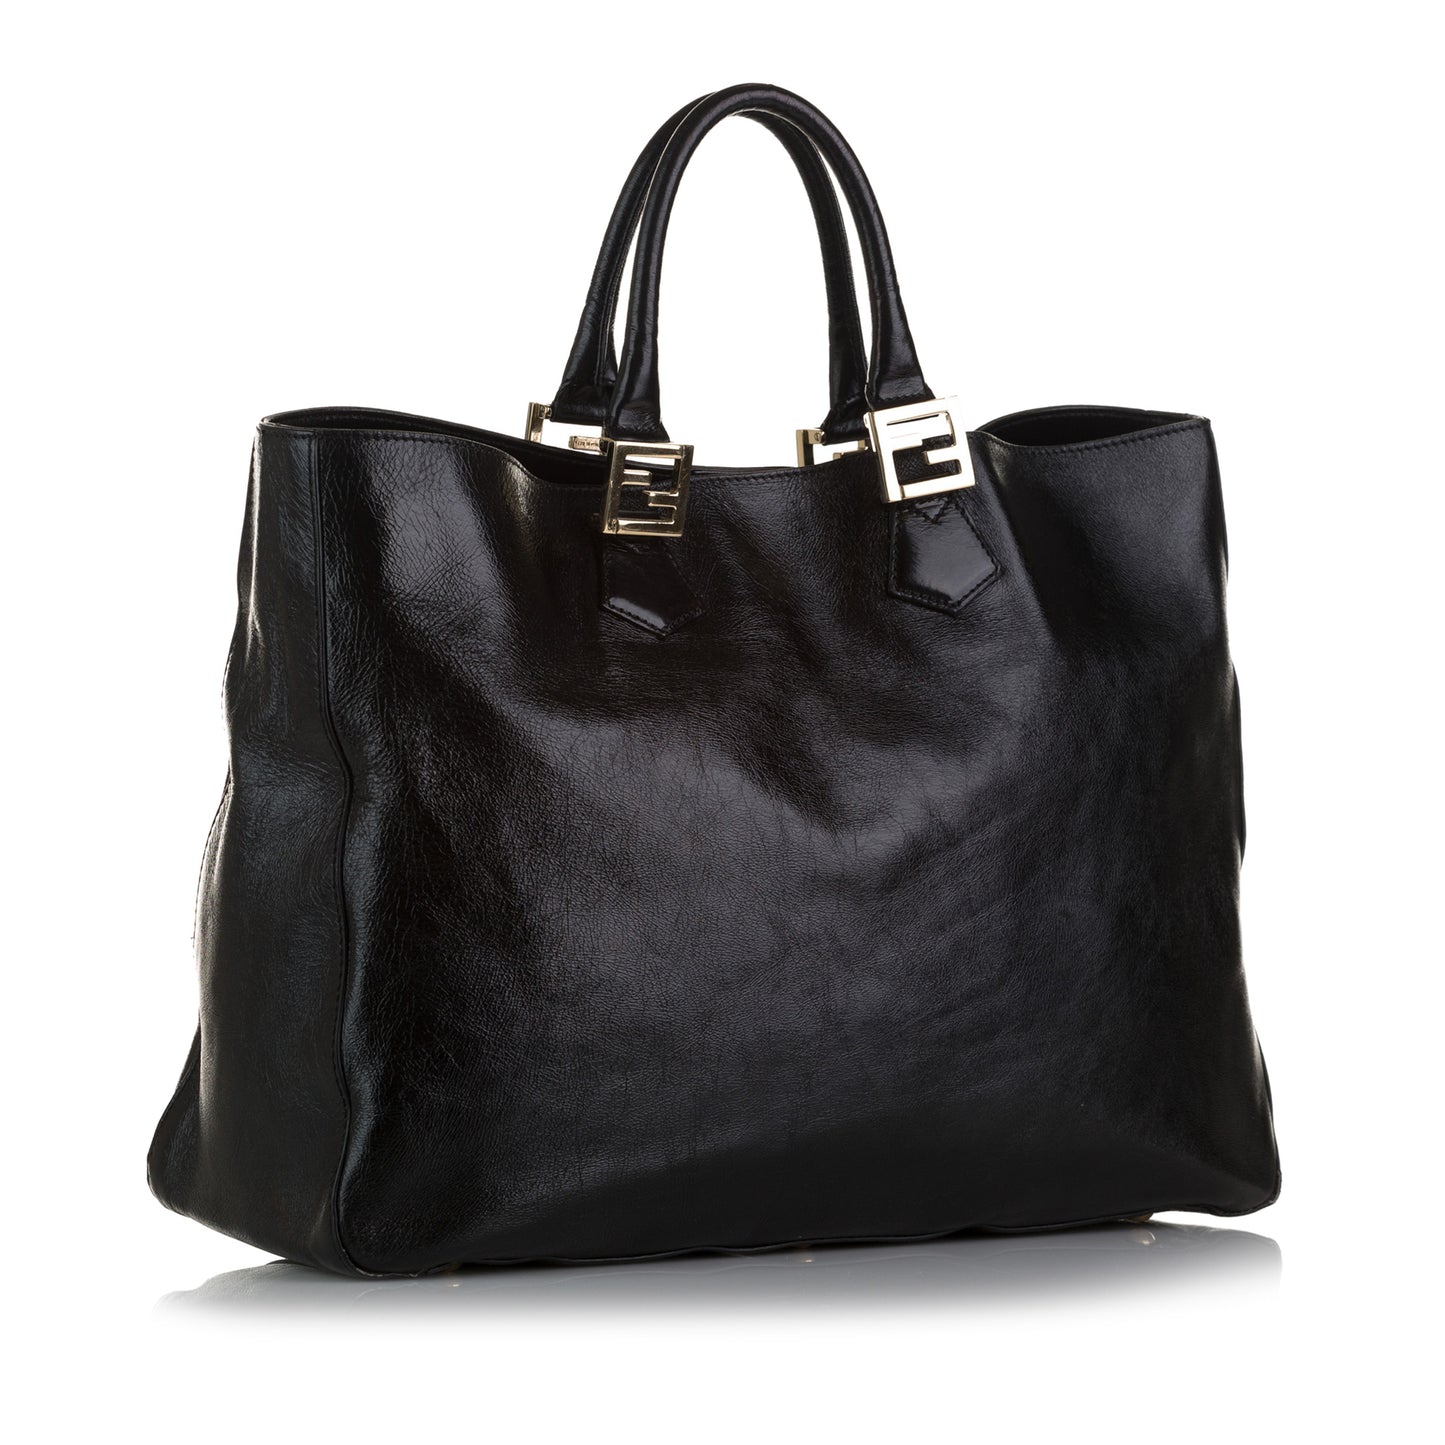 Twins Leather Tote Bag